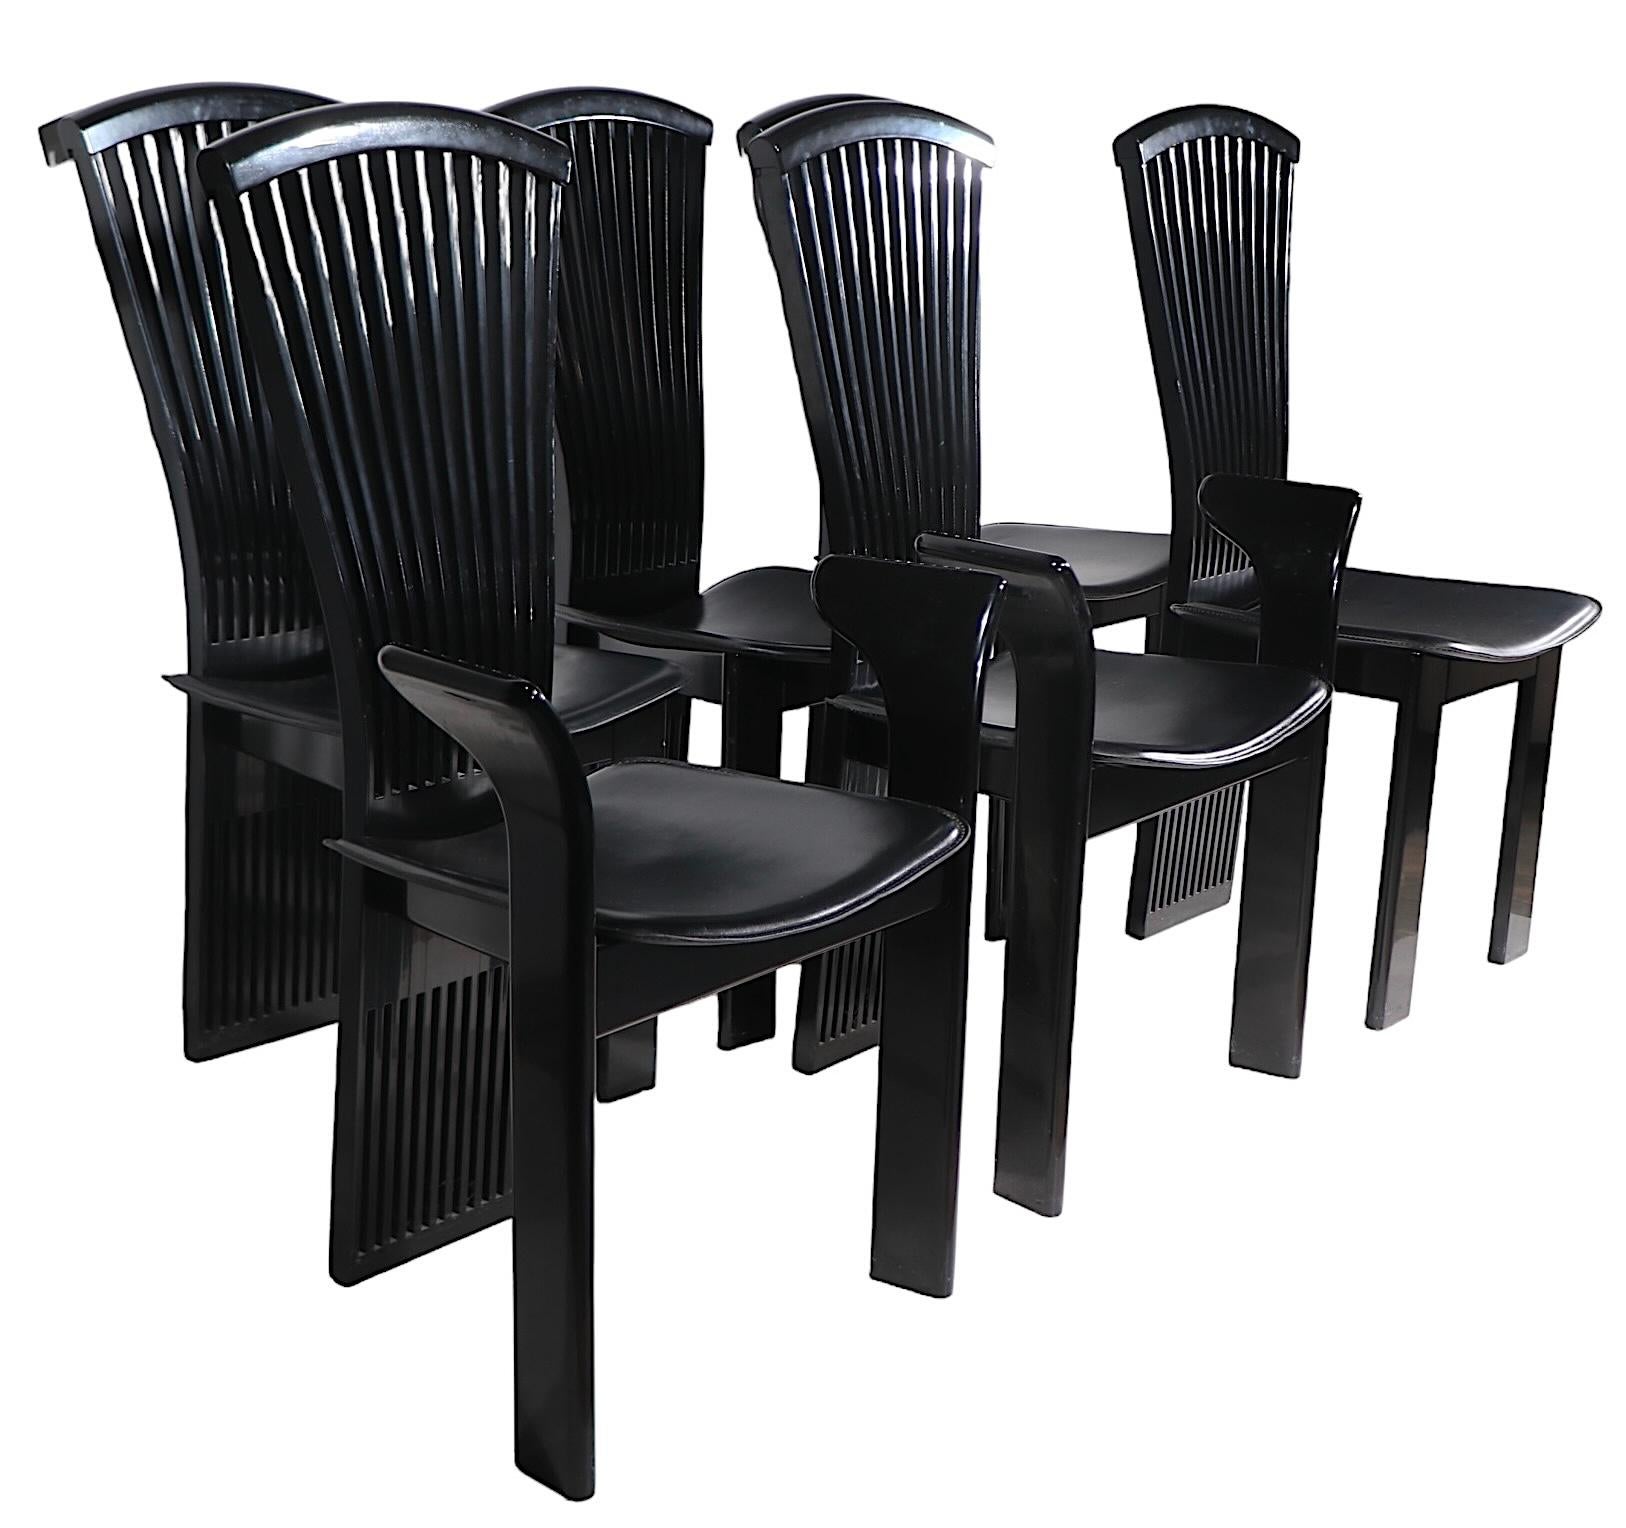 Heroic set of Post Modern, Hollywood Regency school  black lacquered  dining chairs made in Italy by Pieto Costantini, imported by Ello, circa 1970-1980's. The set consists of four side, and two arm chairs, having a dramatic slatted fan back which